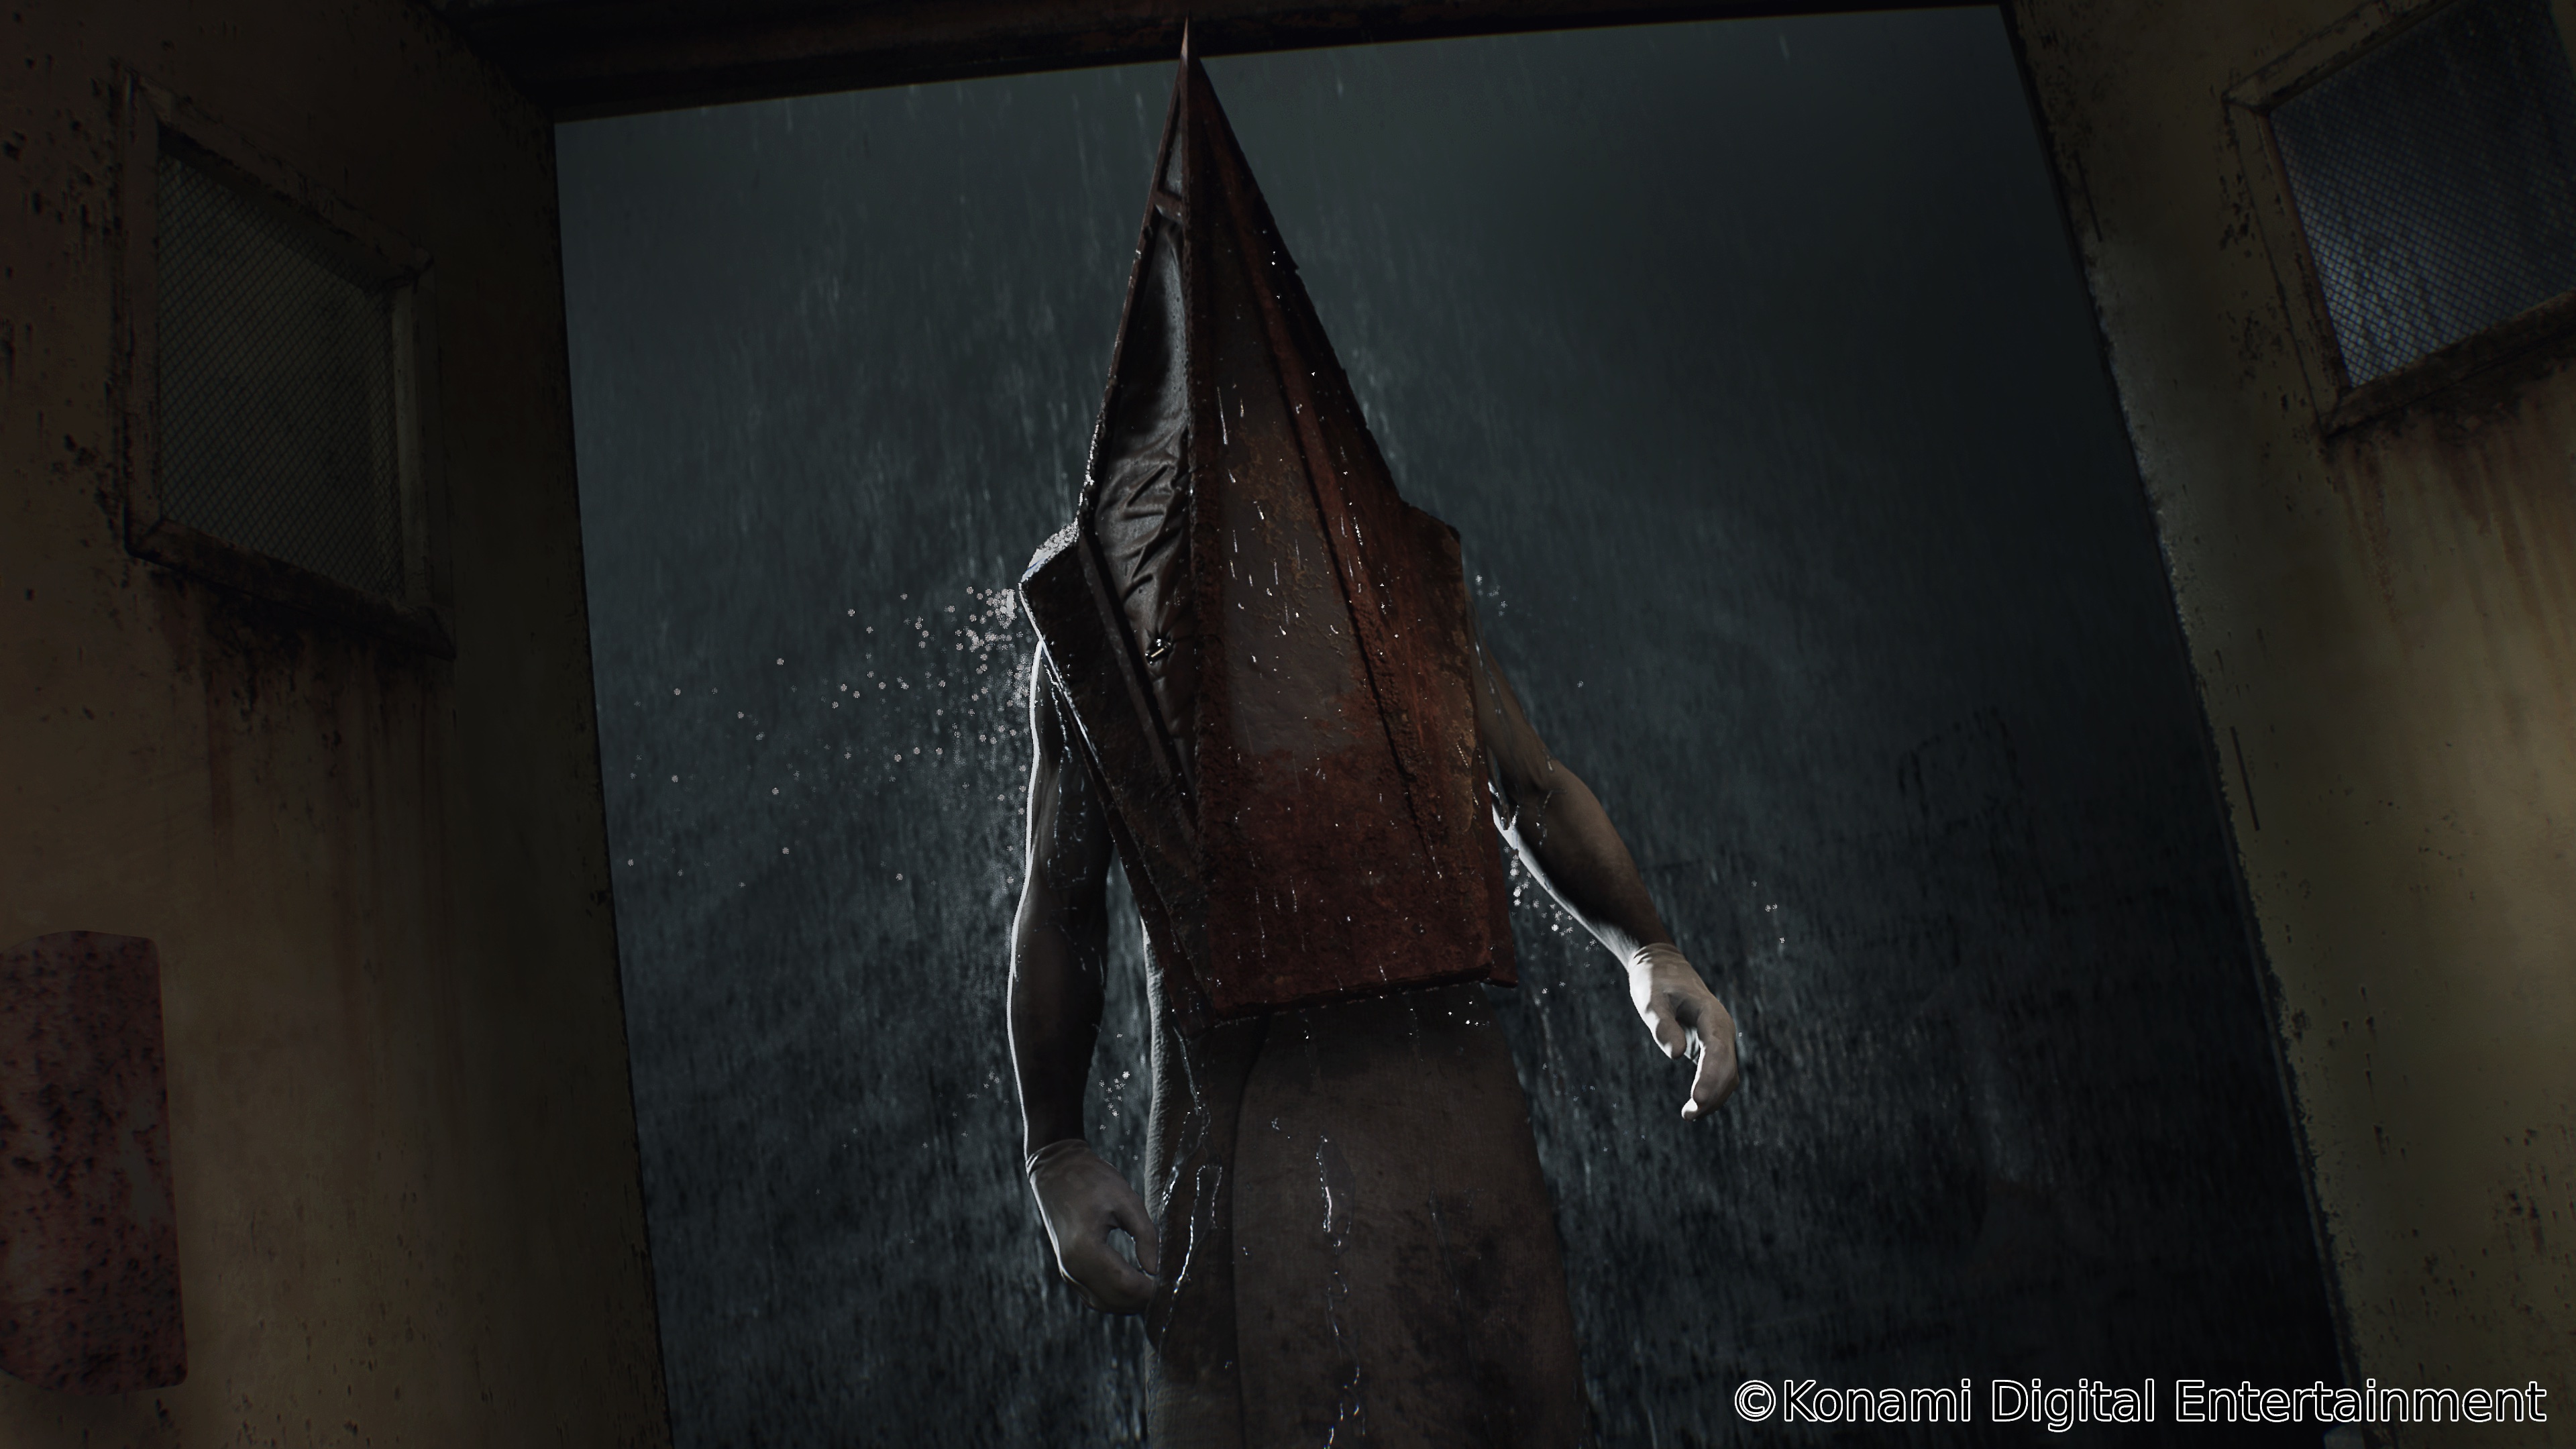 Pyramid Head walks through the rain and through a pair of metal doors in a still from the Silent Hill 2 remake